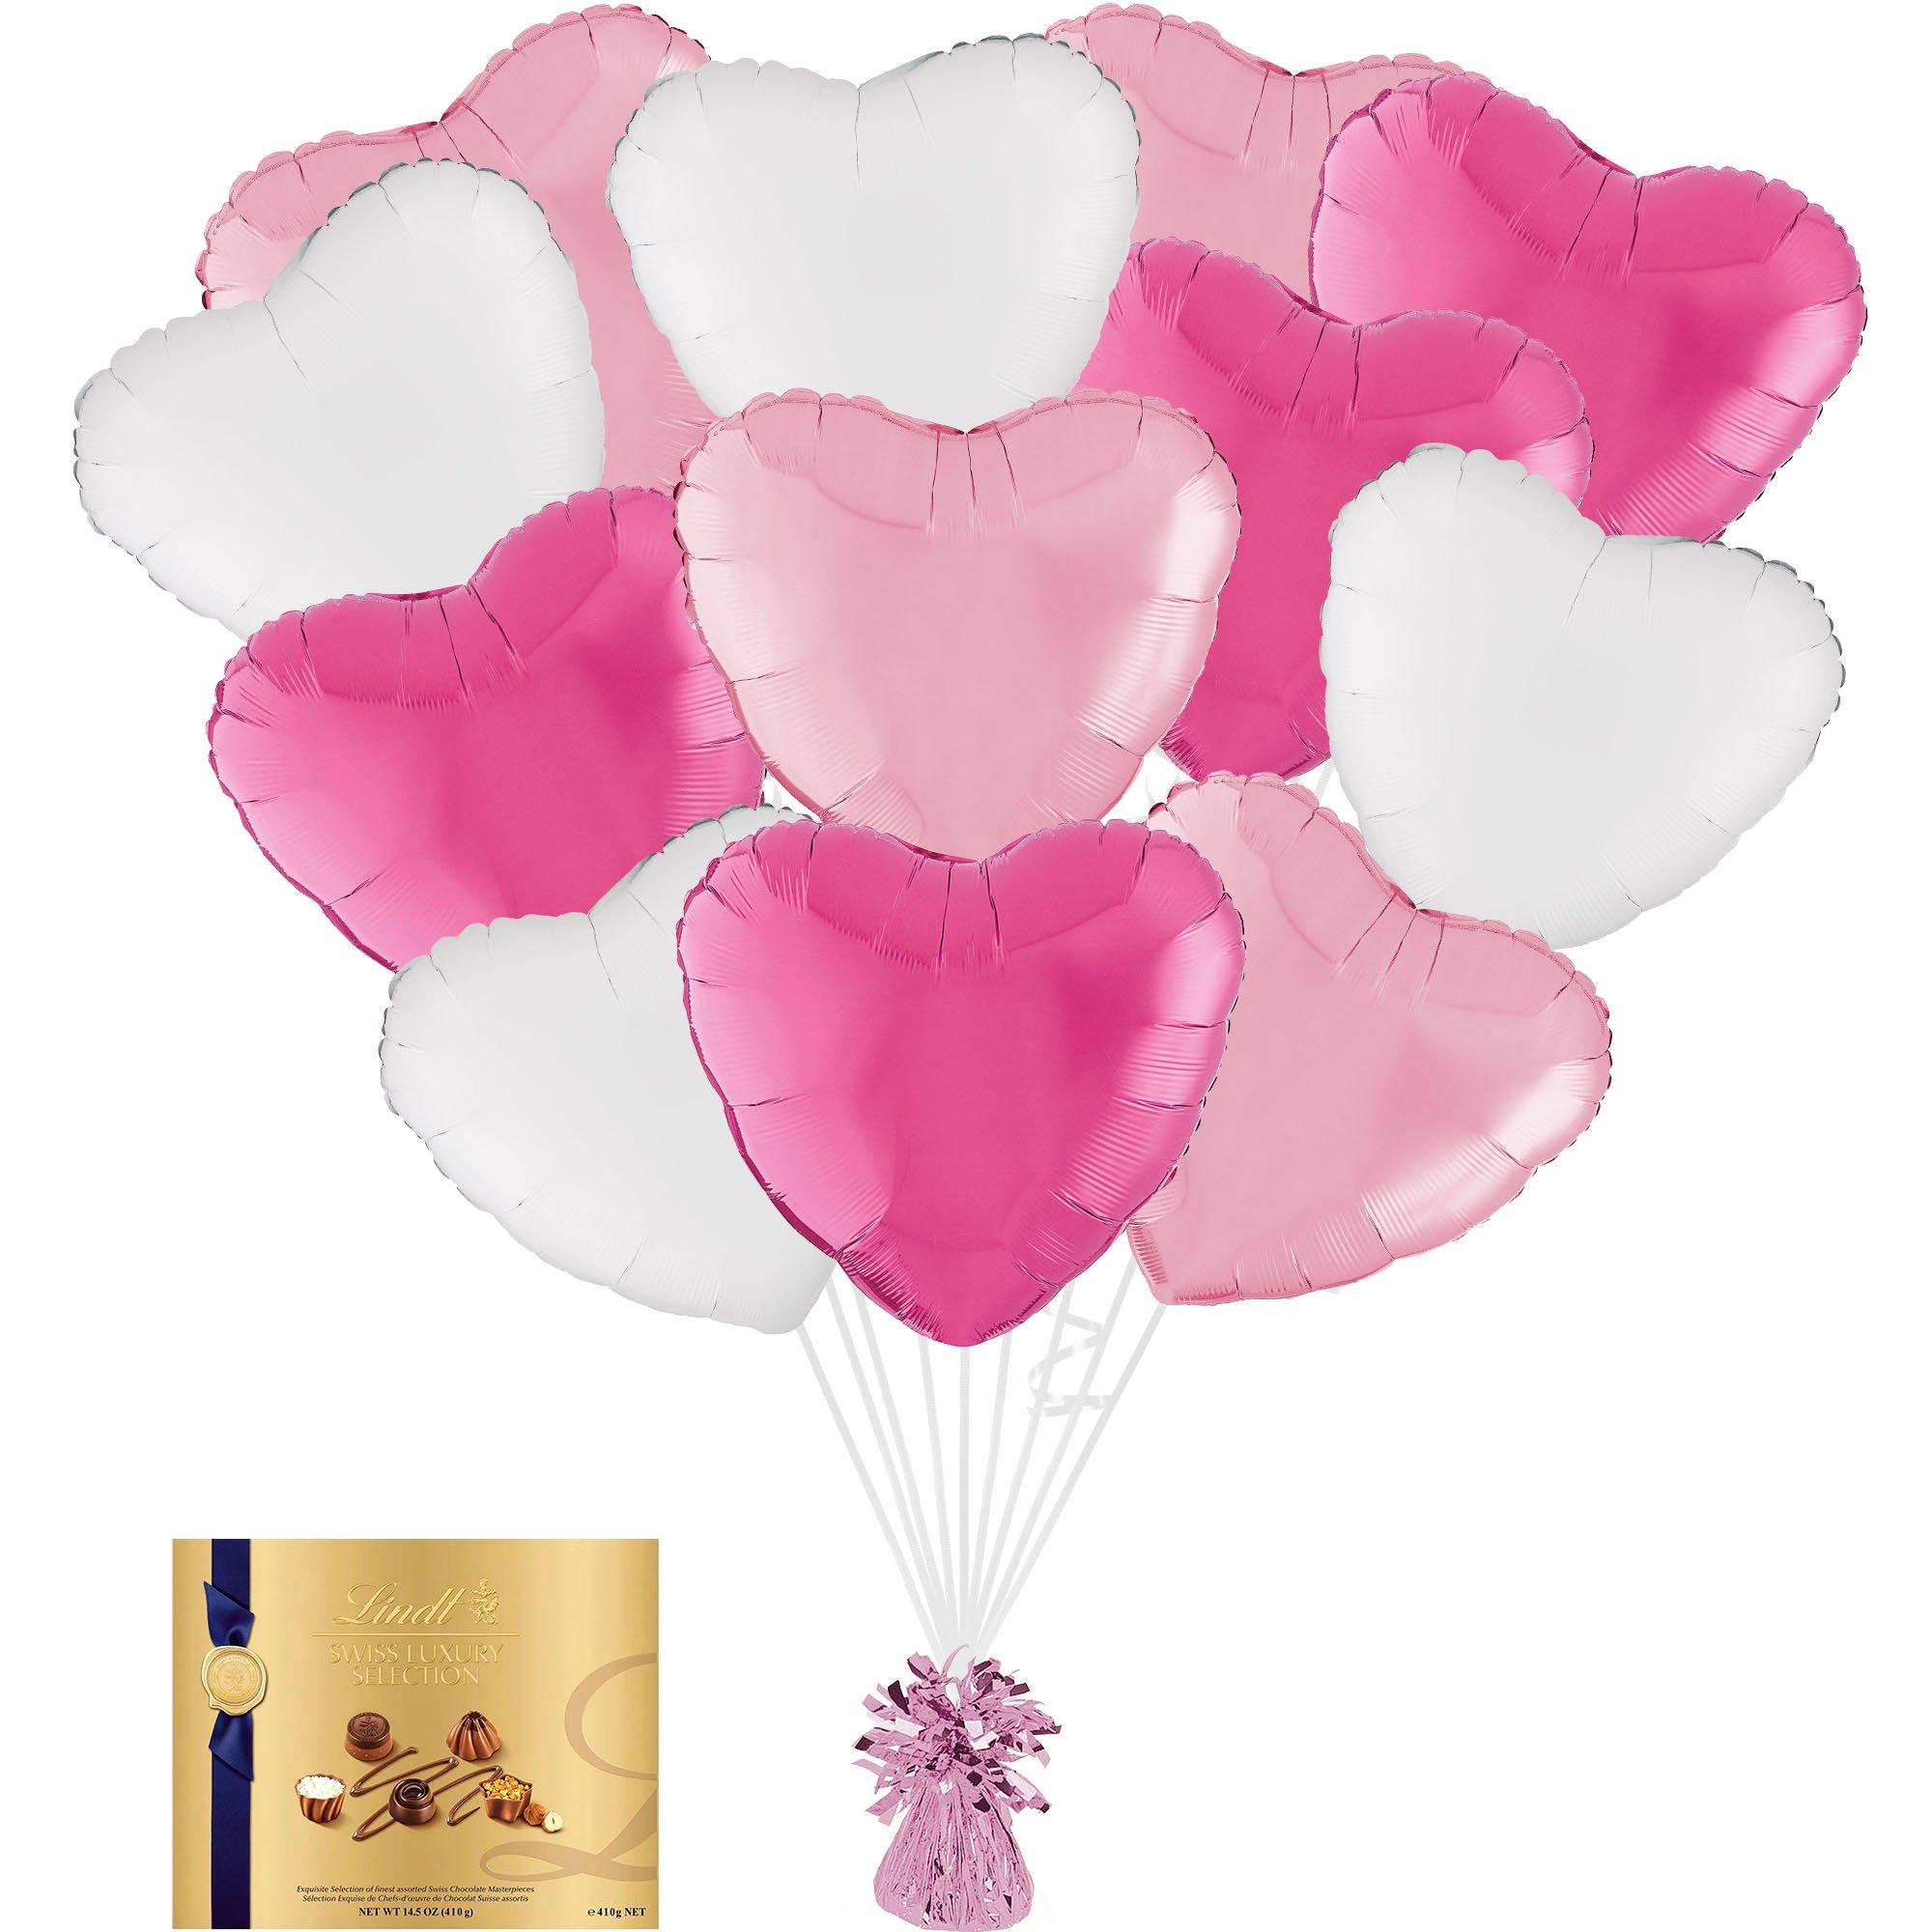 Pink & White Heart Foil Balloon Bouquet with Balloon Weight & Lindt Chocolates - Gift Set